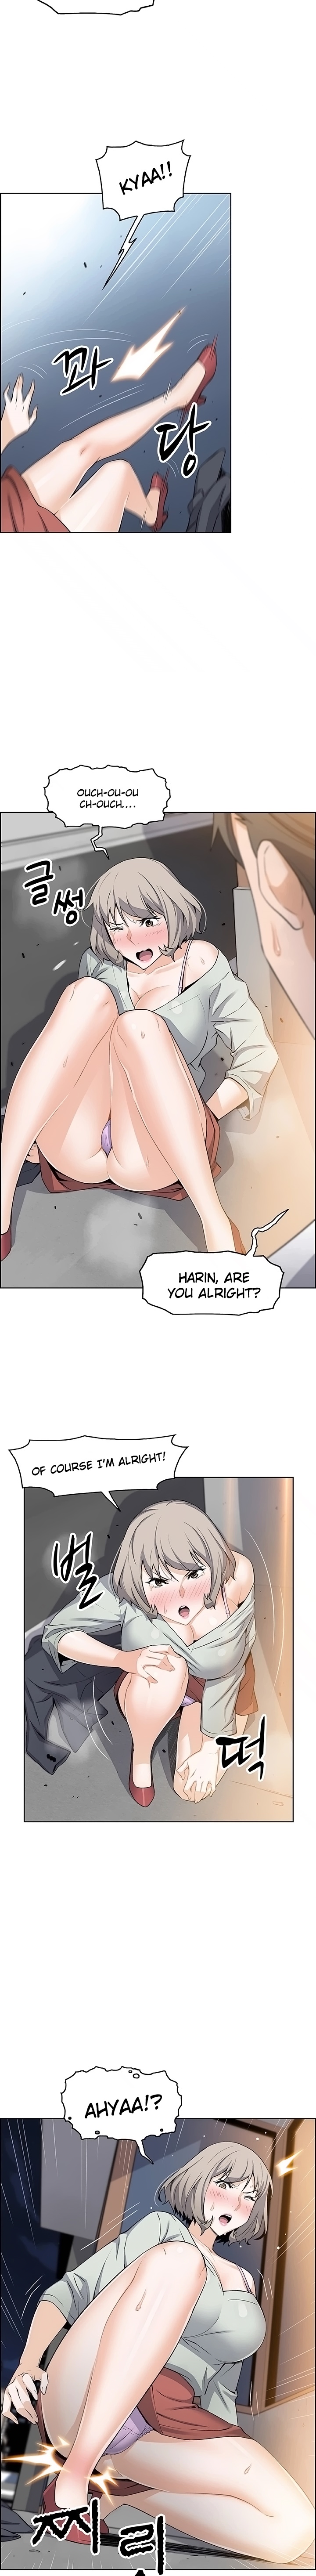 Housekeeper Manhwa - Chapter 16 Page 6